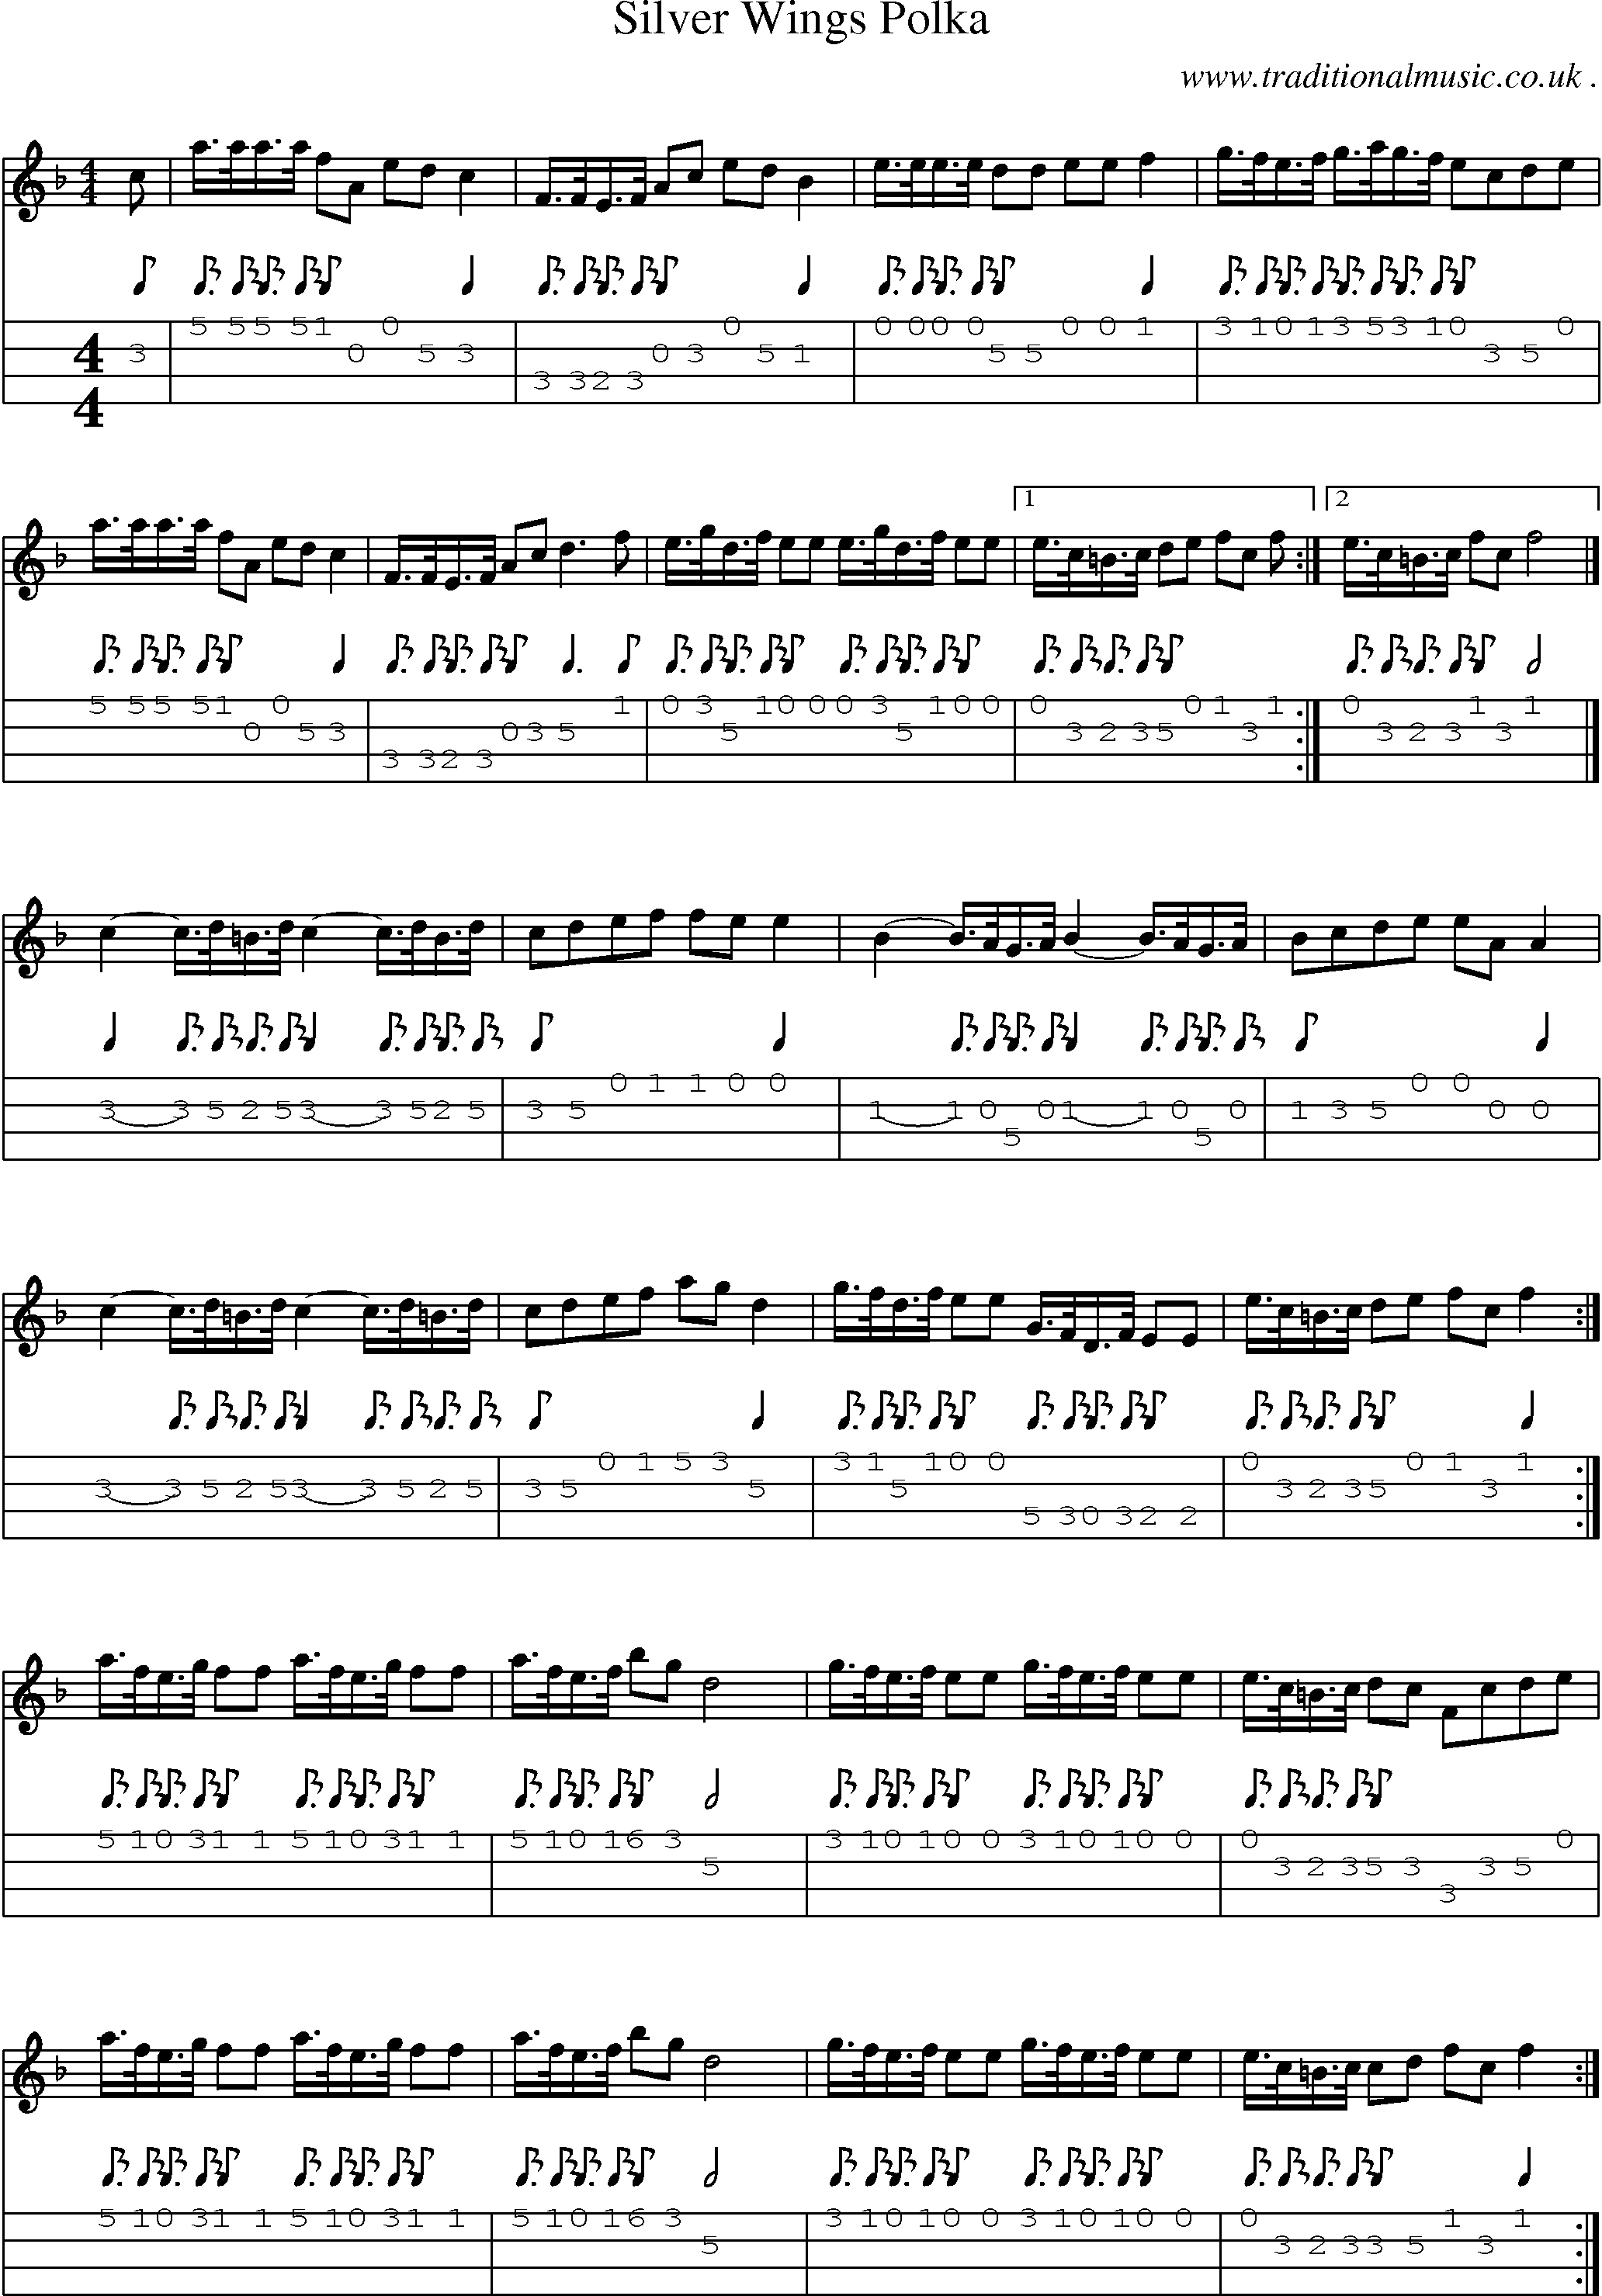 Sheet-music  score, Chords and Mandolin Tabs for Silver Wings Polka